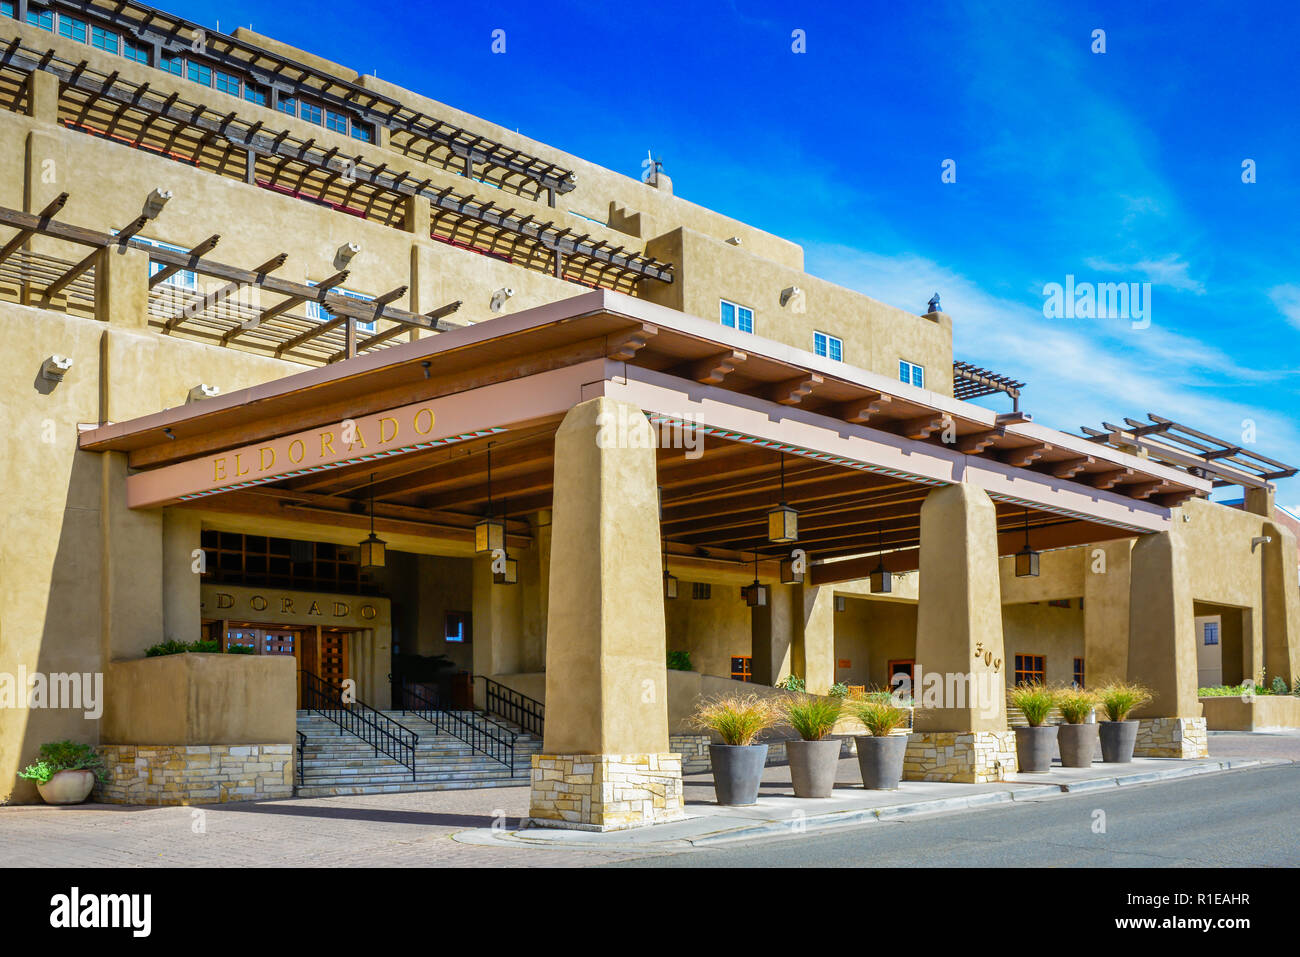 The Eldorado Hotel and Spa is a high-end luxury hotel in the heart of historic downtown Santa Fe, NM,  USA Stock Photo